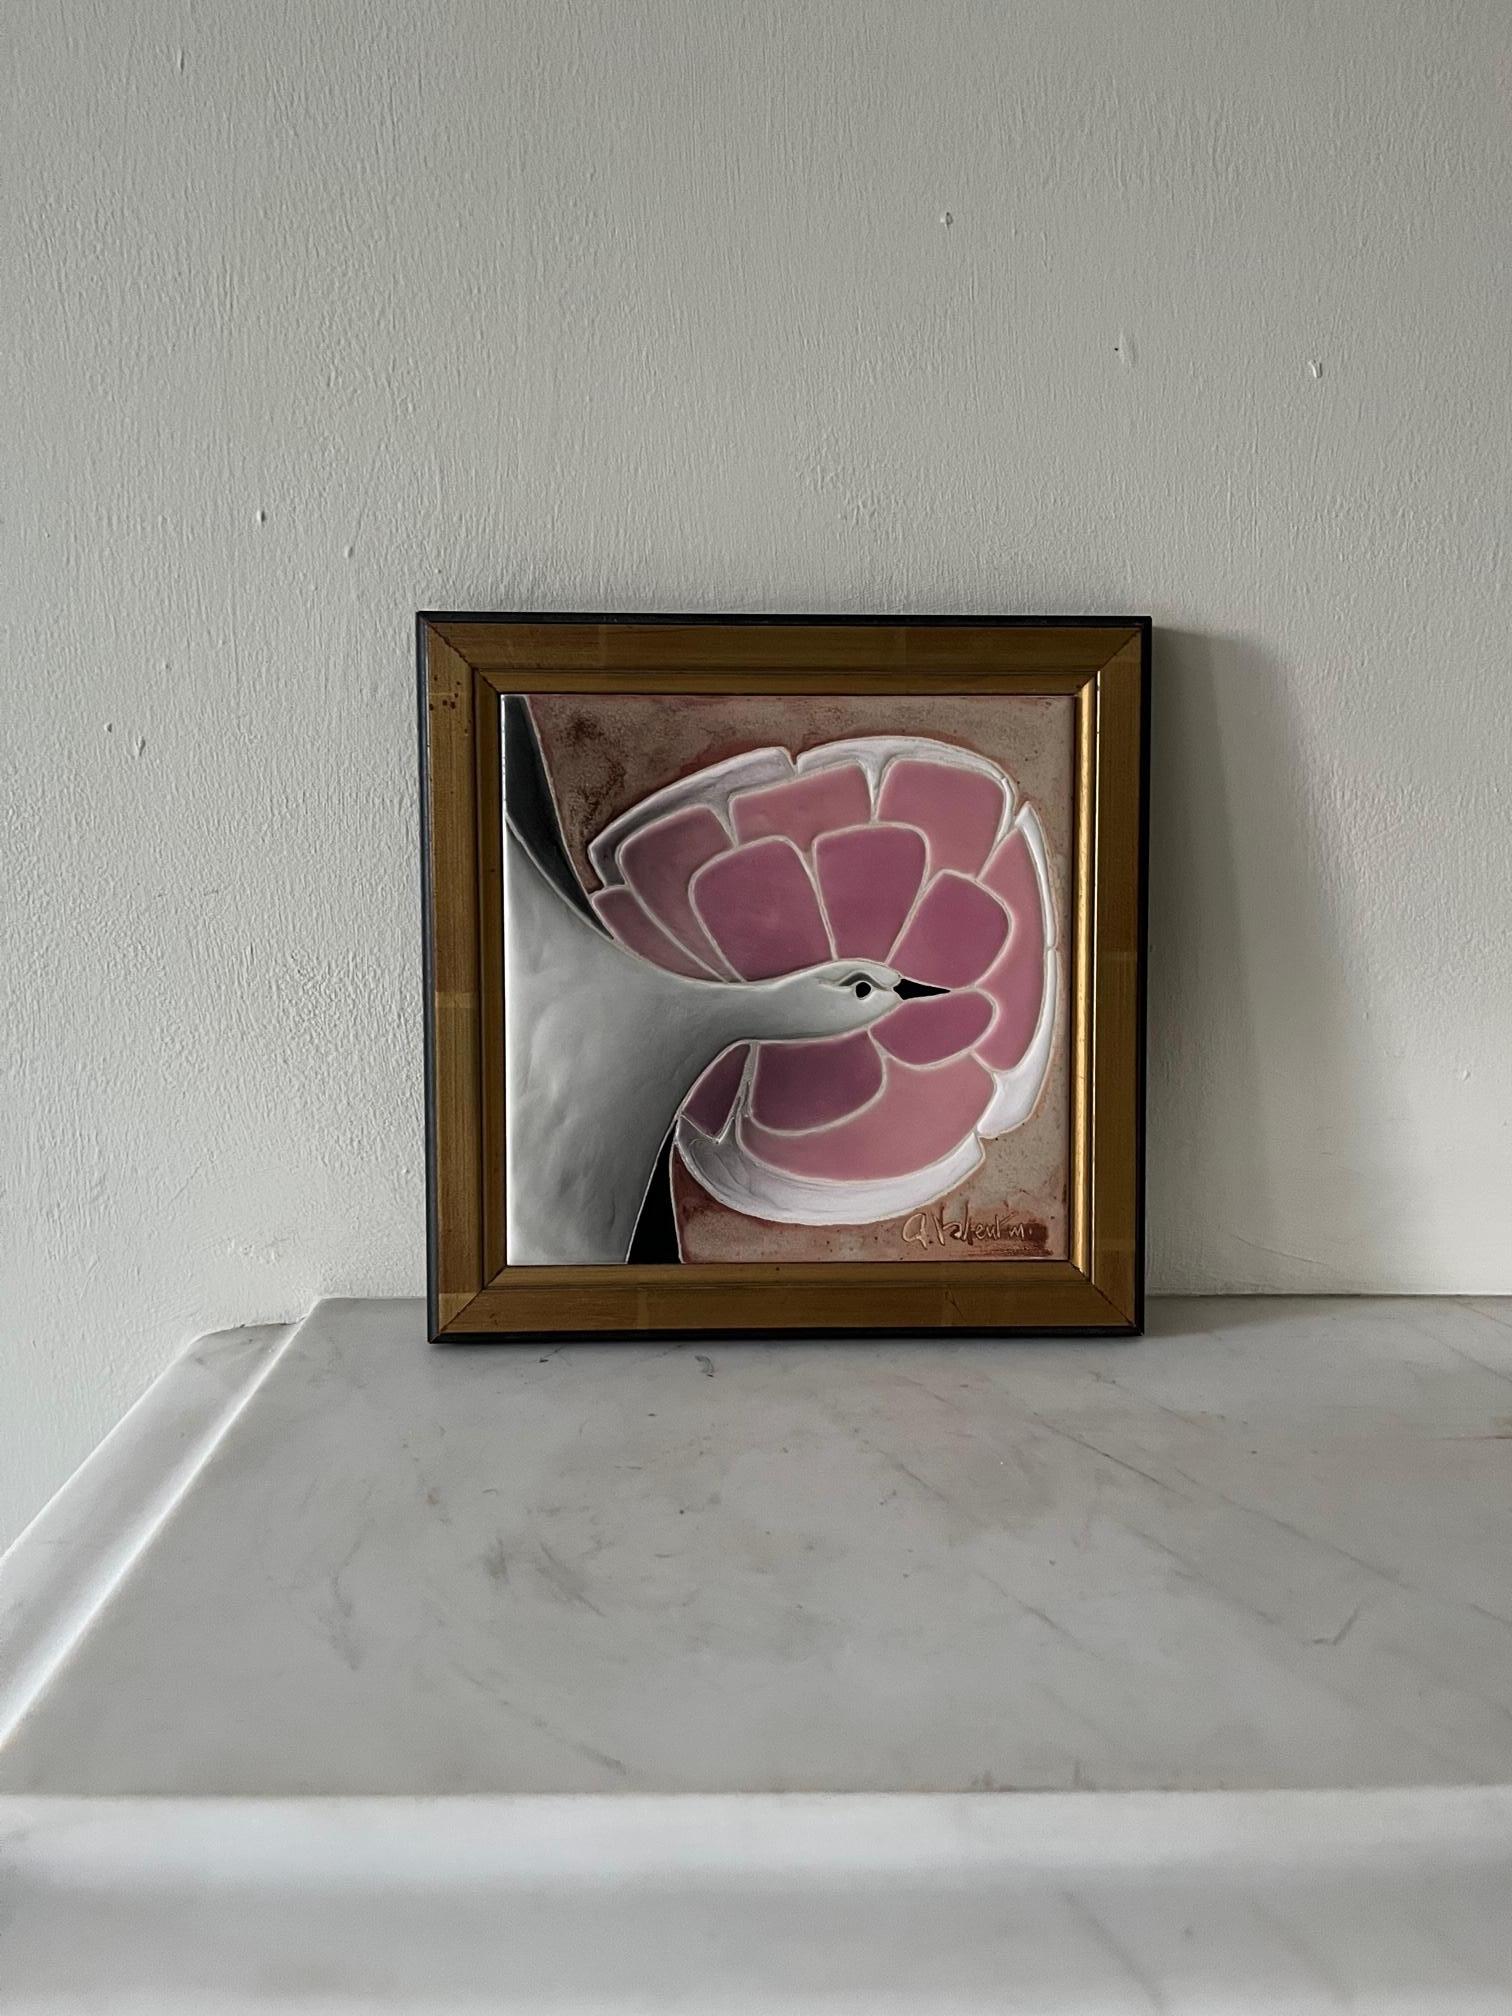 A beautiful small framed ceramic plate designed and signed by Gilbert Valentin for Galerie Les Archanges Vallauris. Les Archanges was a workshop created by Gilbert Valentin and his wife in Vallauris and where his ceramics and other artists ceramics